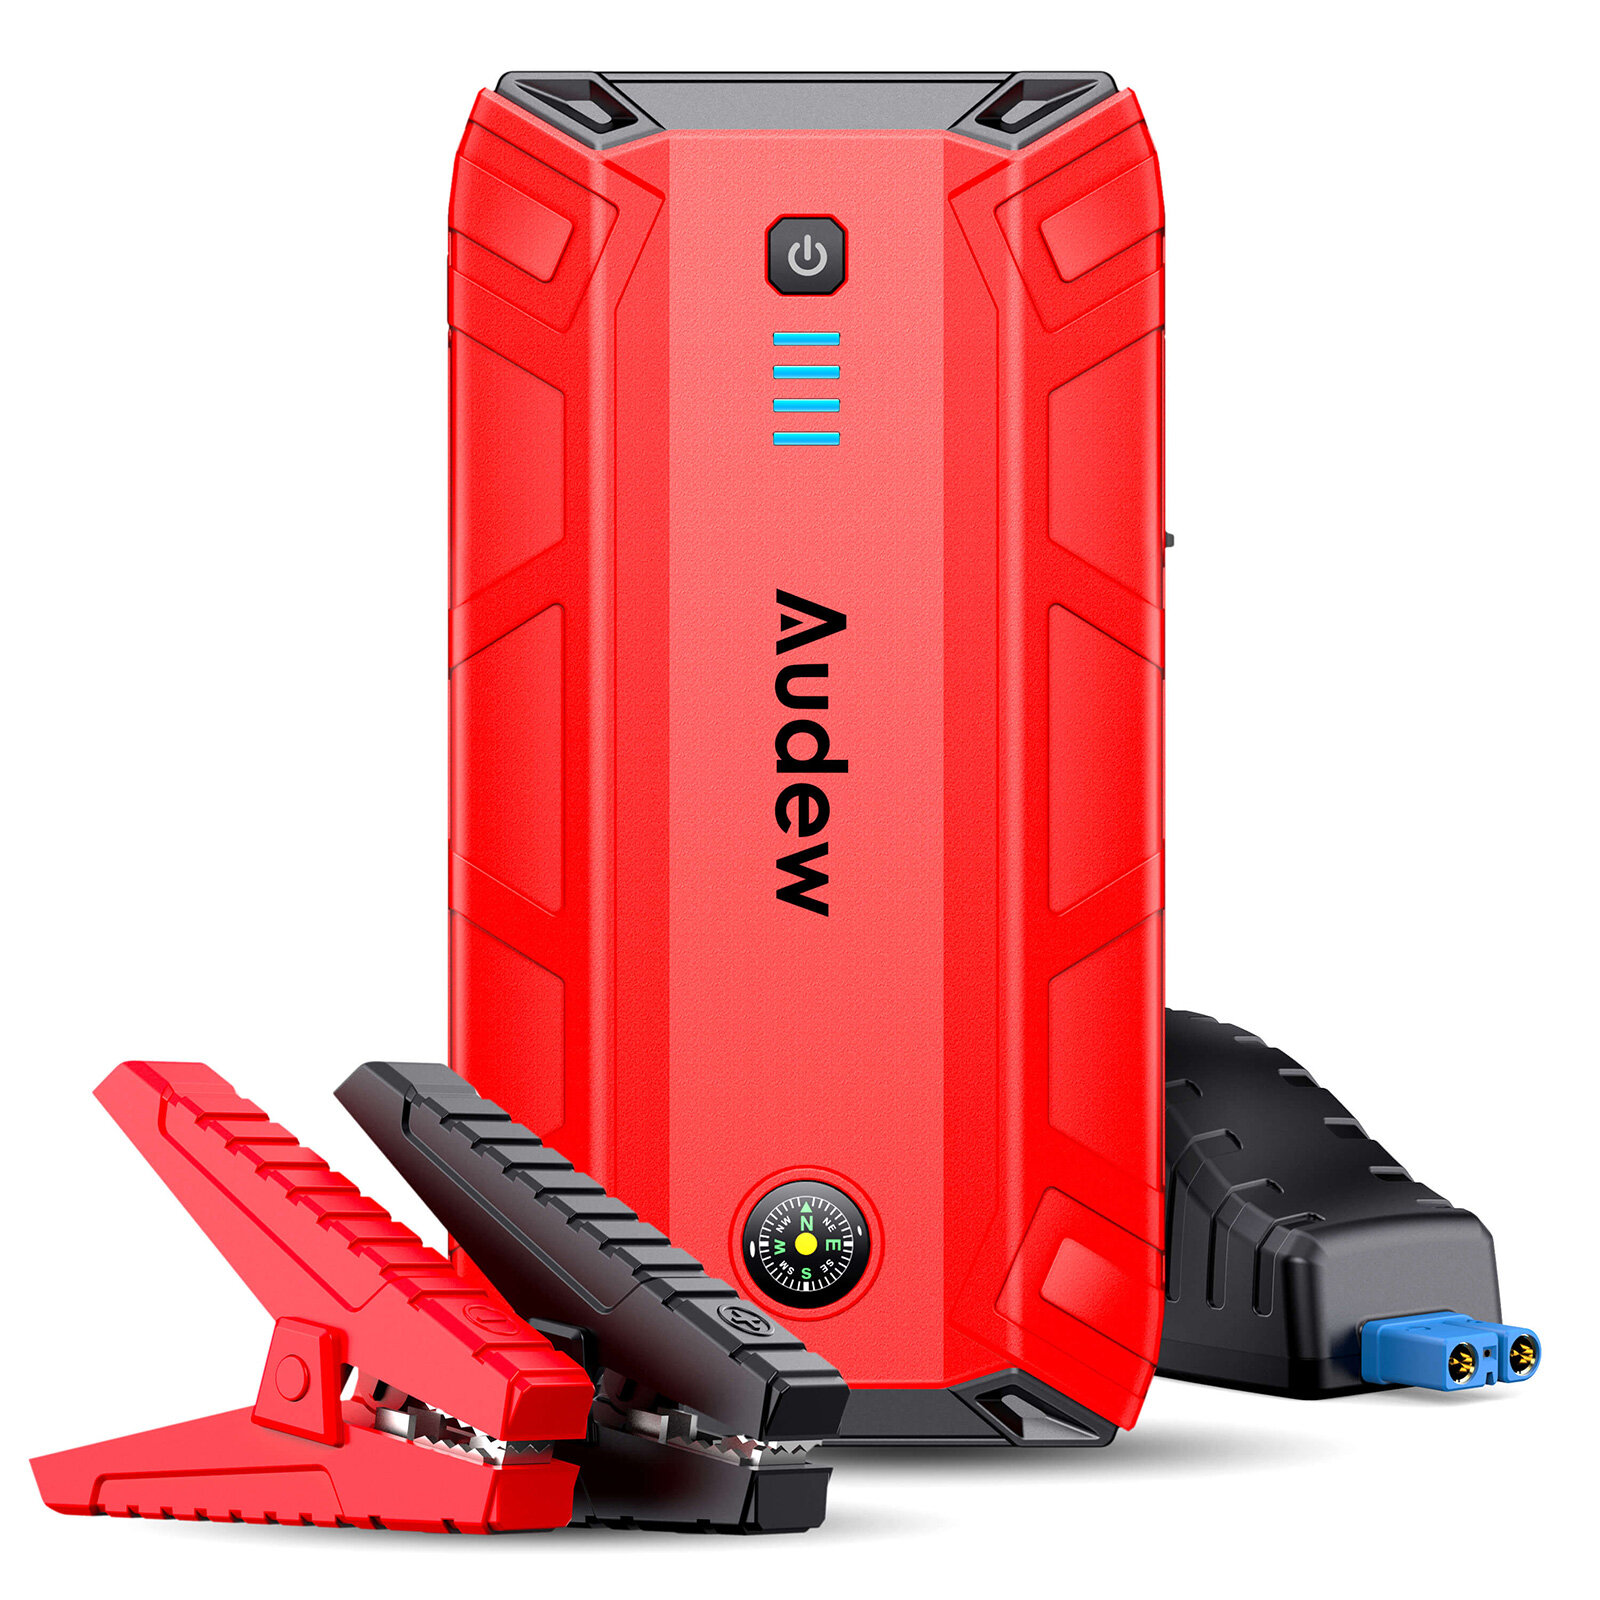 

AUDEW 1500A 18000mAh Portable Car Jump Starter Battery Charger Emergency Booster Powerbank with LED Flashlight Compass Q